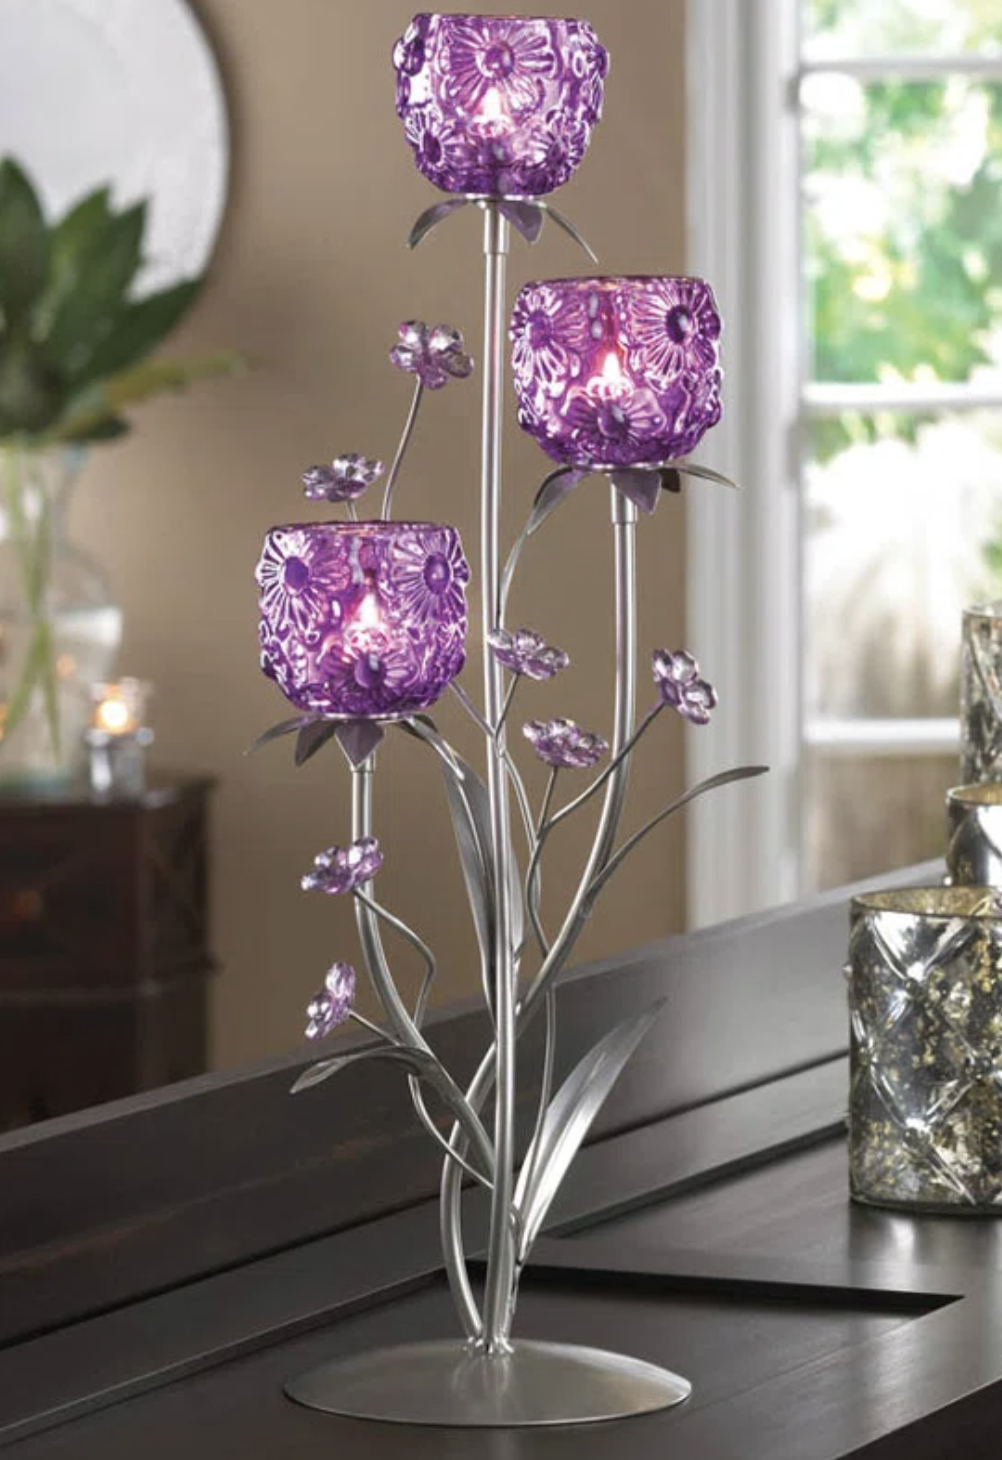 Five purple, patterned candle holders arranged on a metallic tree-like stand on a table